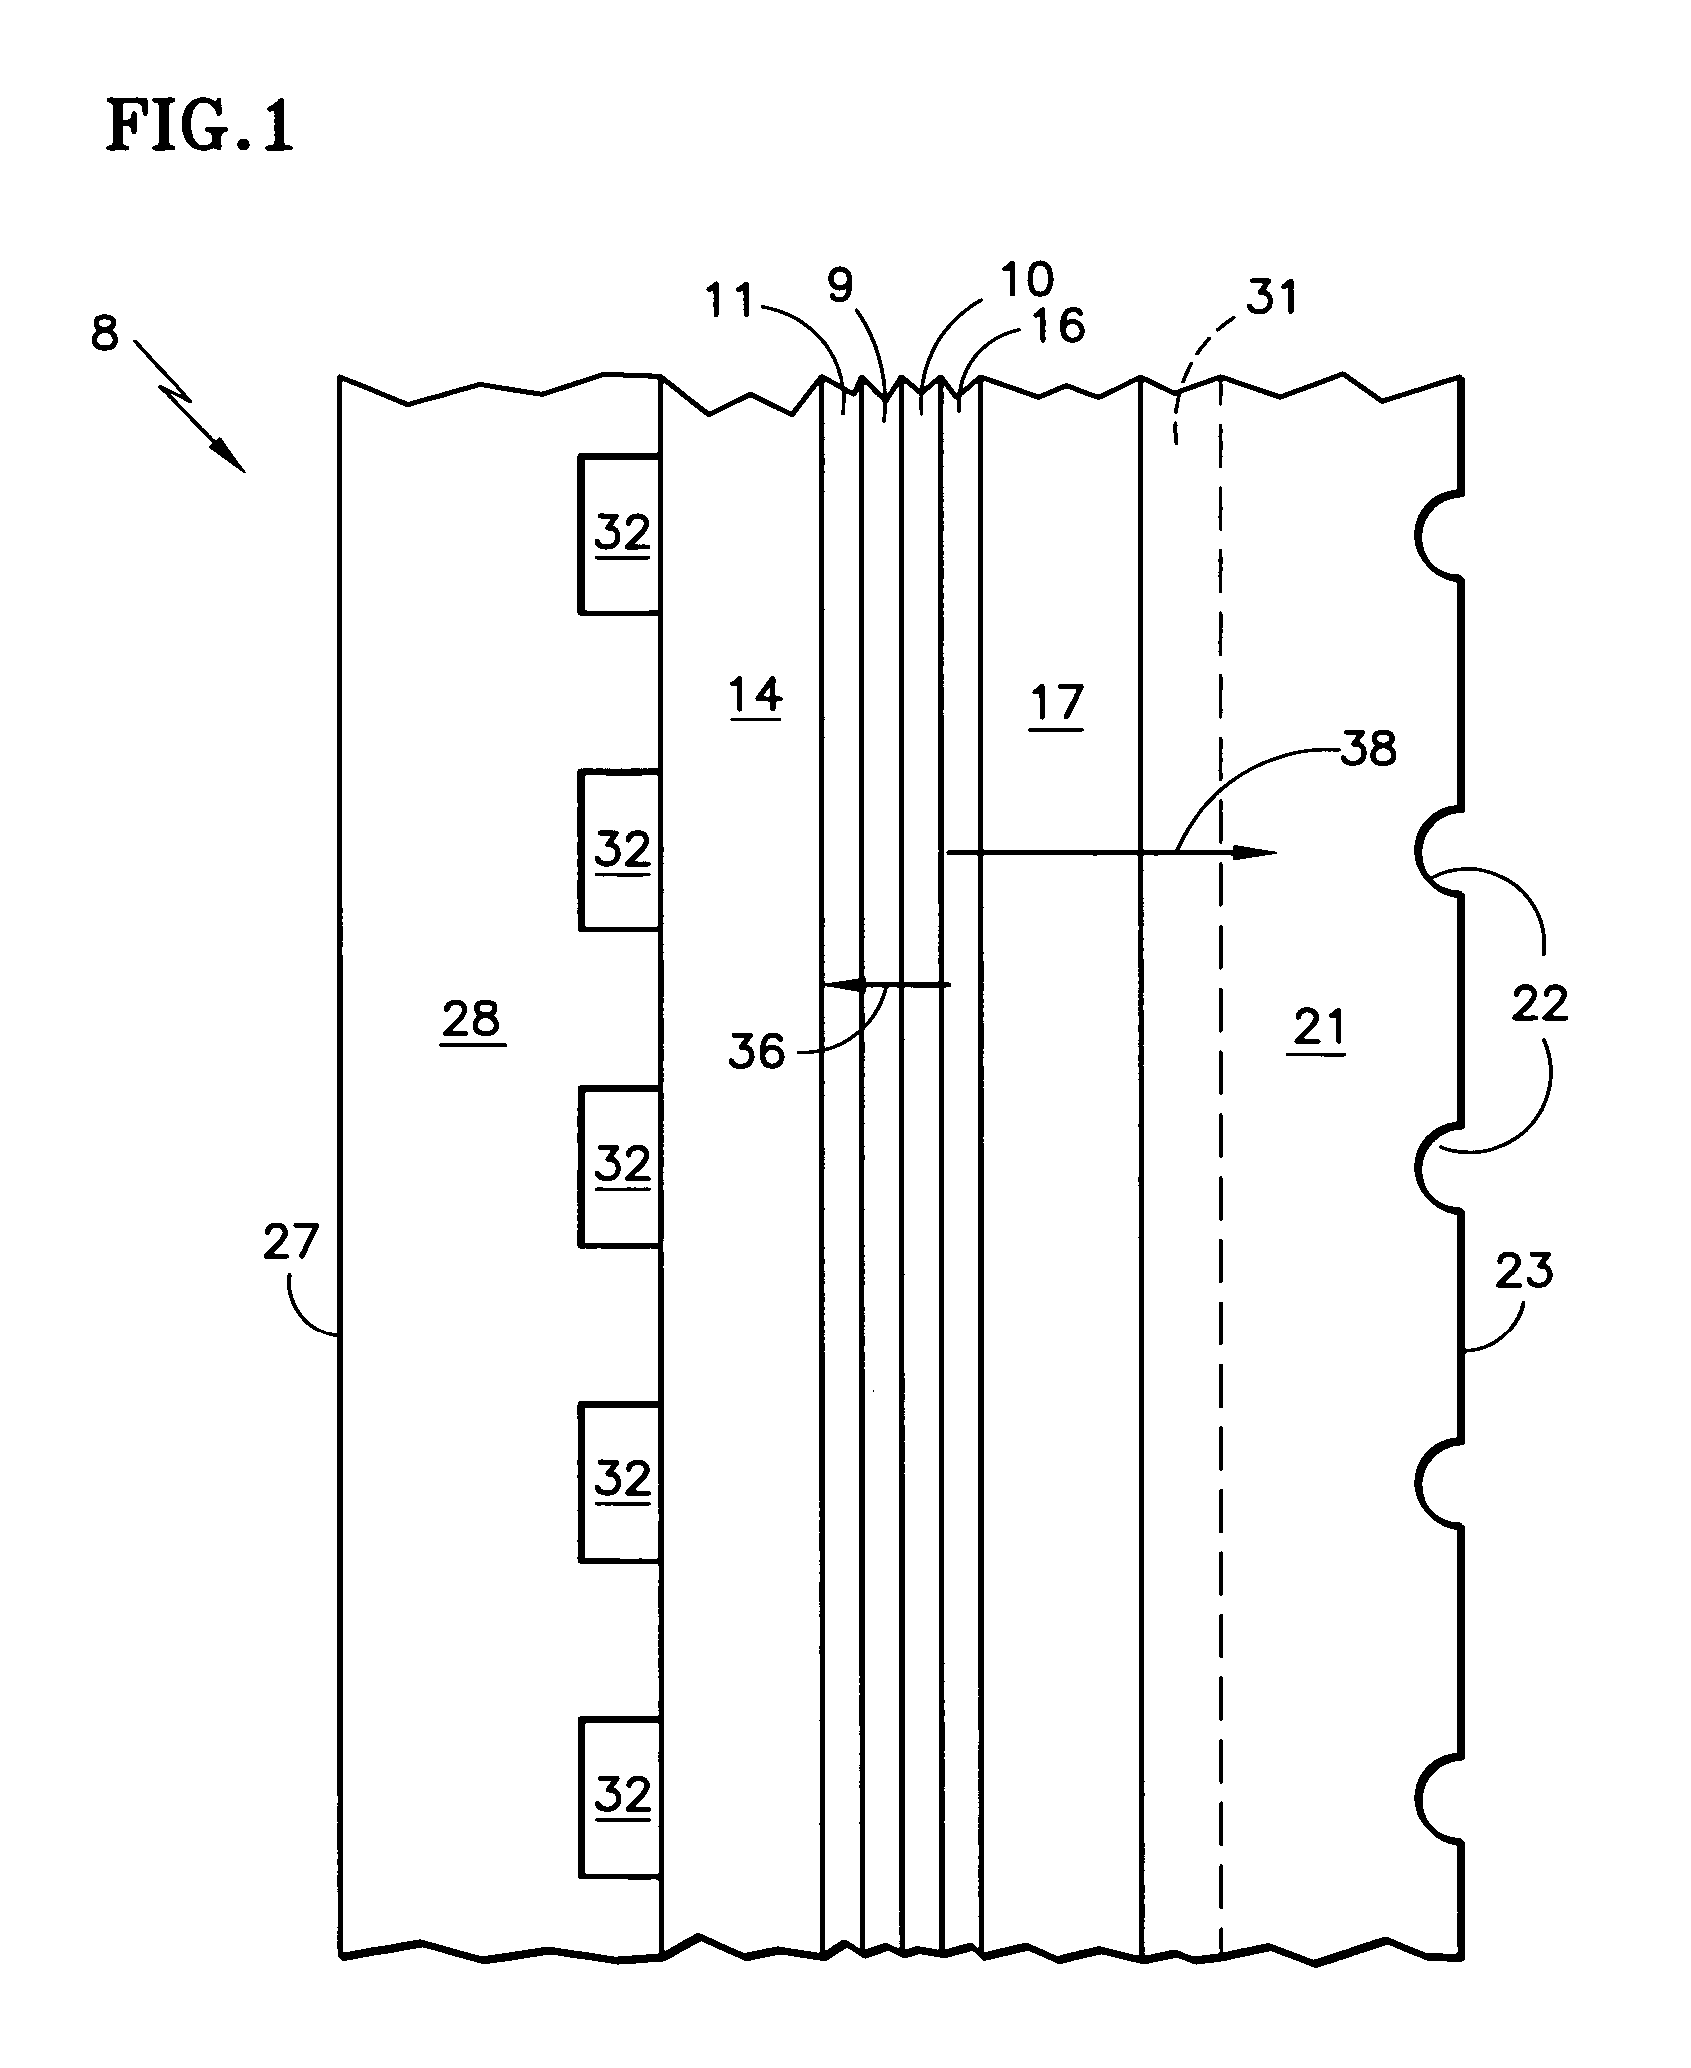 Fuel cell with thermal conductance of anode greater than cathode